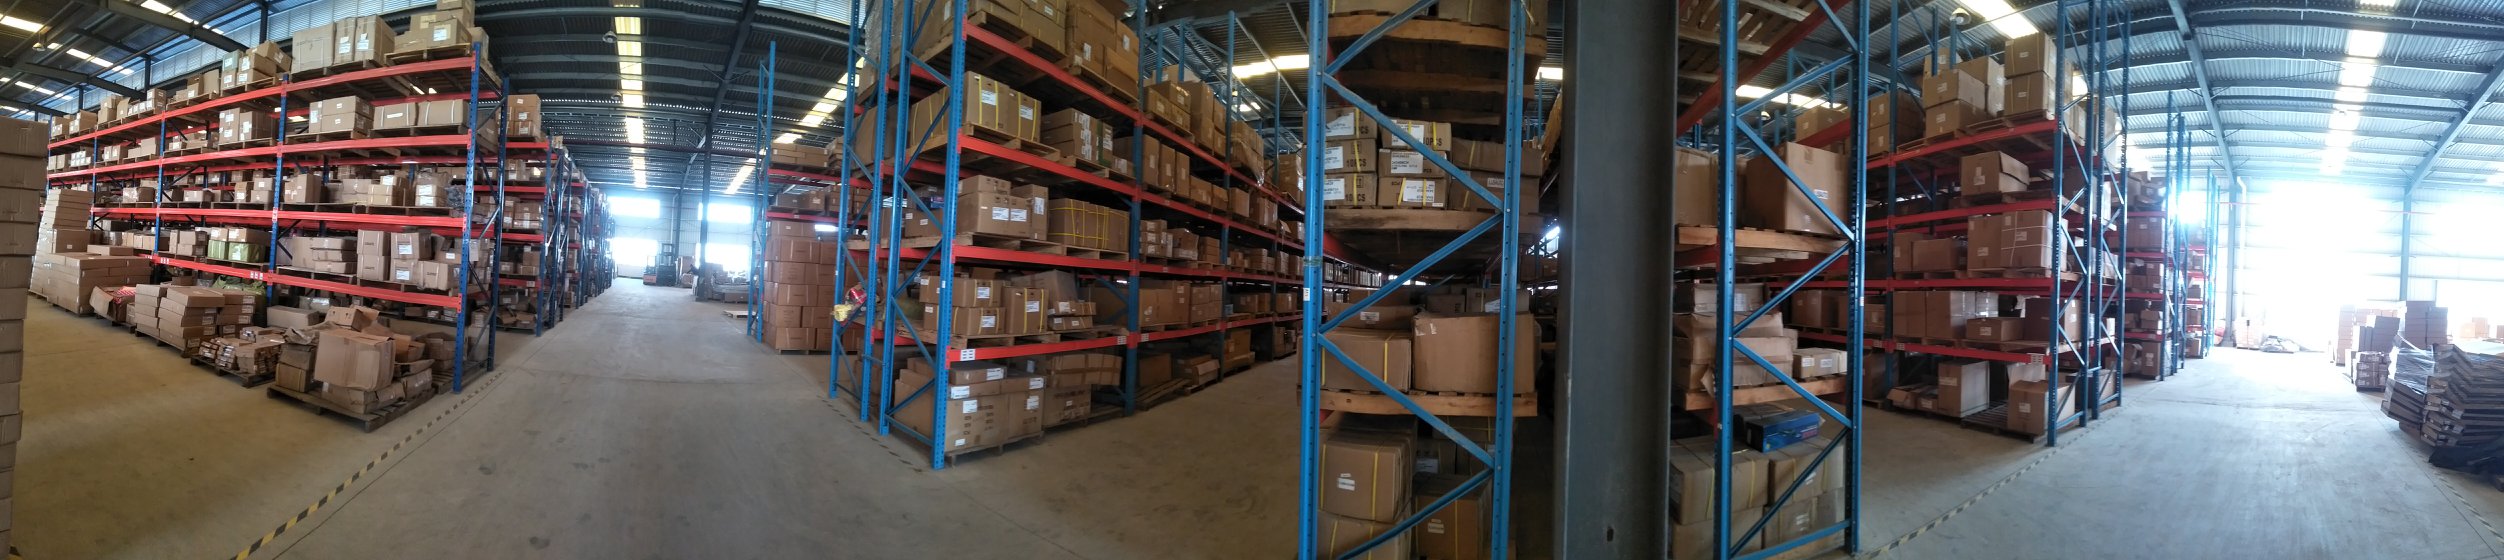 Warehouse Inside View1